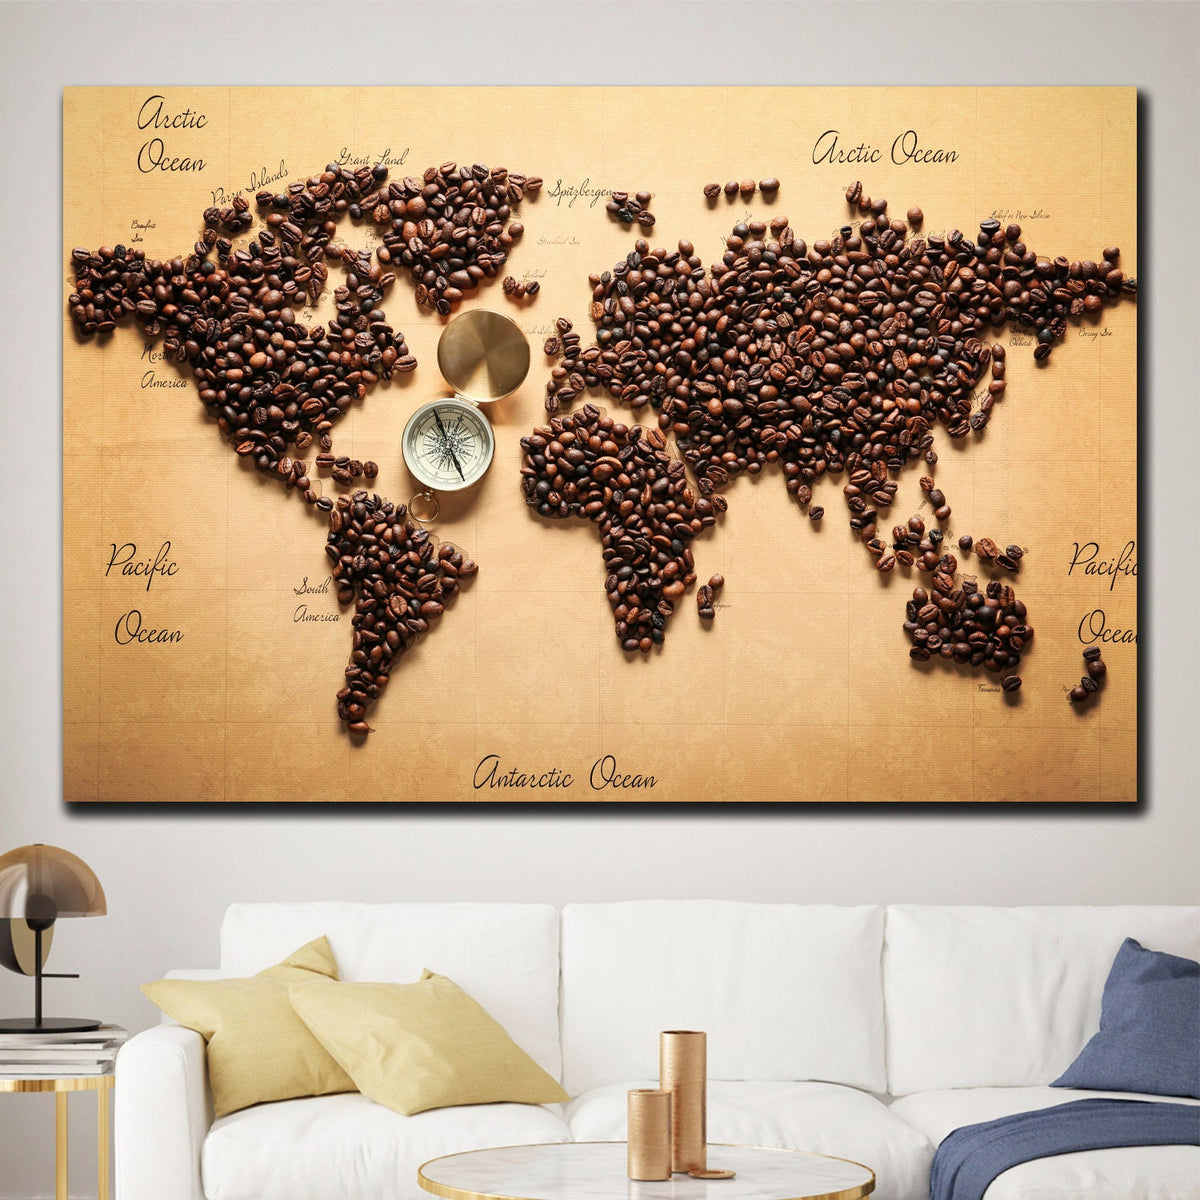 https://cdn.shopify.com/s/files/1/0387/9986/8044/products/WorldMapwithCoffeeBeansCanvasArtprintStretched-4.jpg